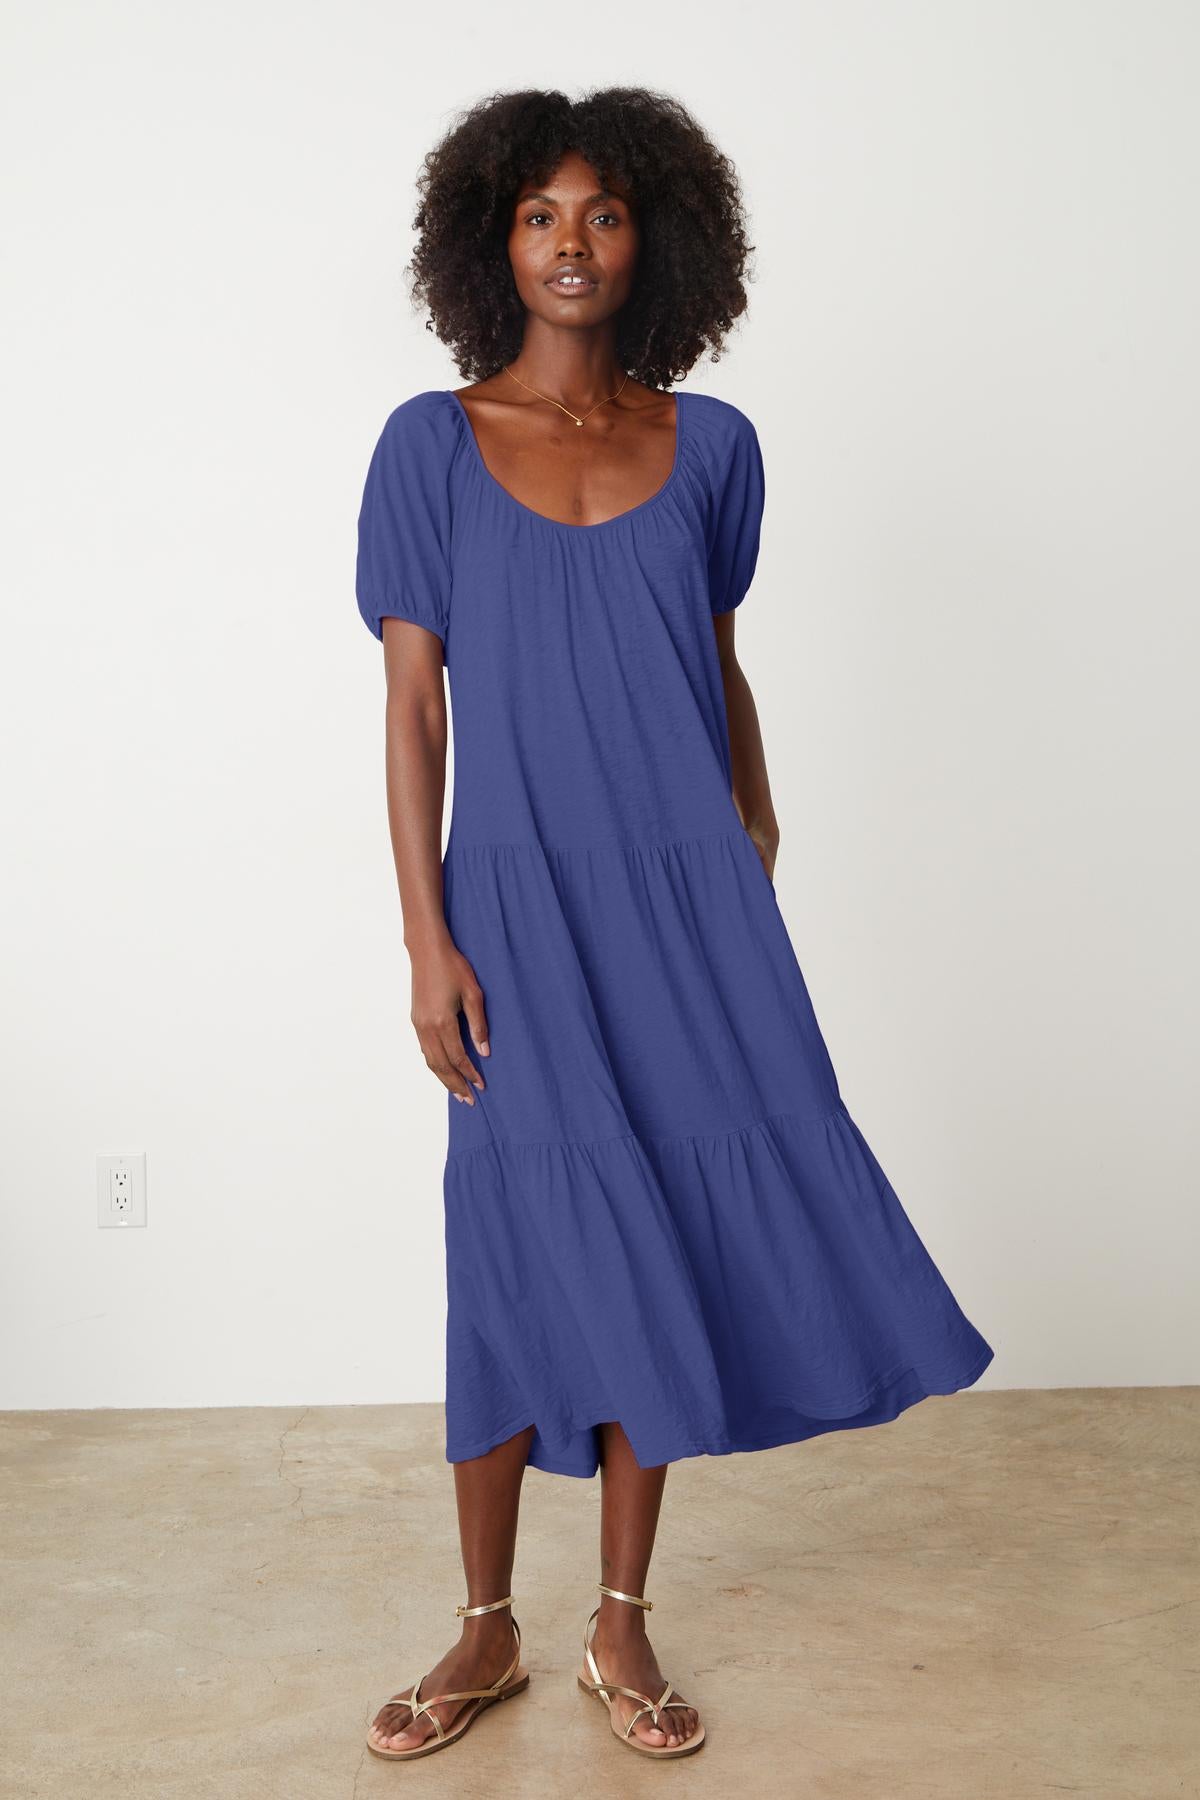   A black woman wearing the JANE SCOOP NECK TIERED DRESS by Velvet by Graham & Spencer. 